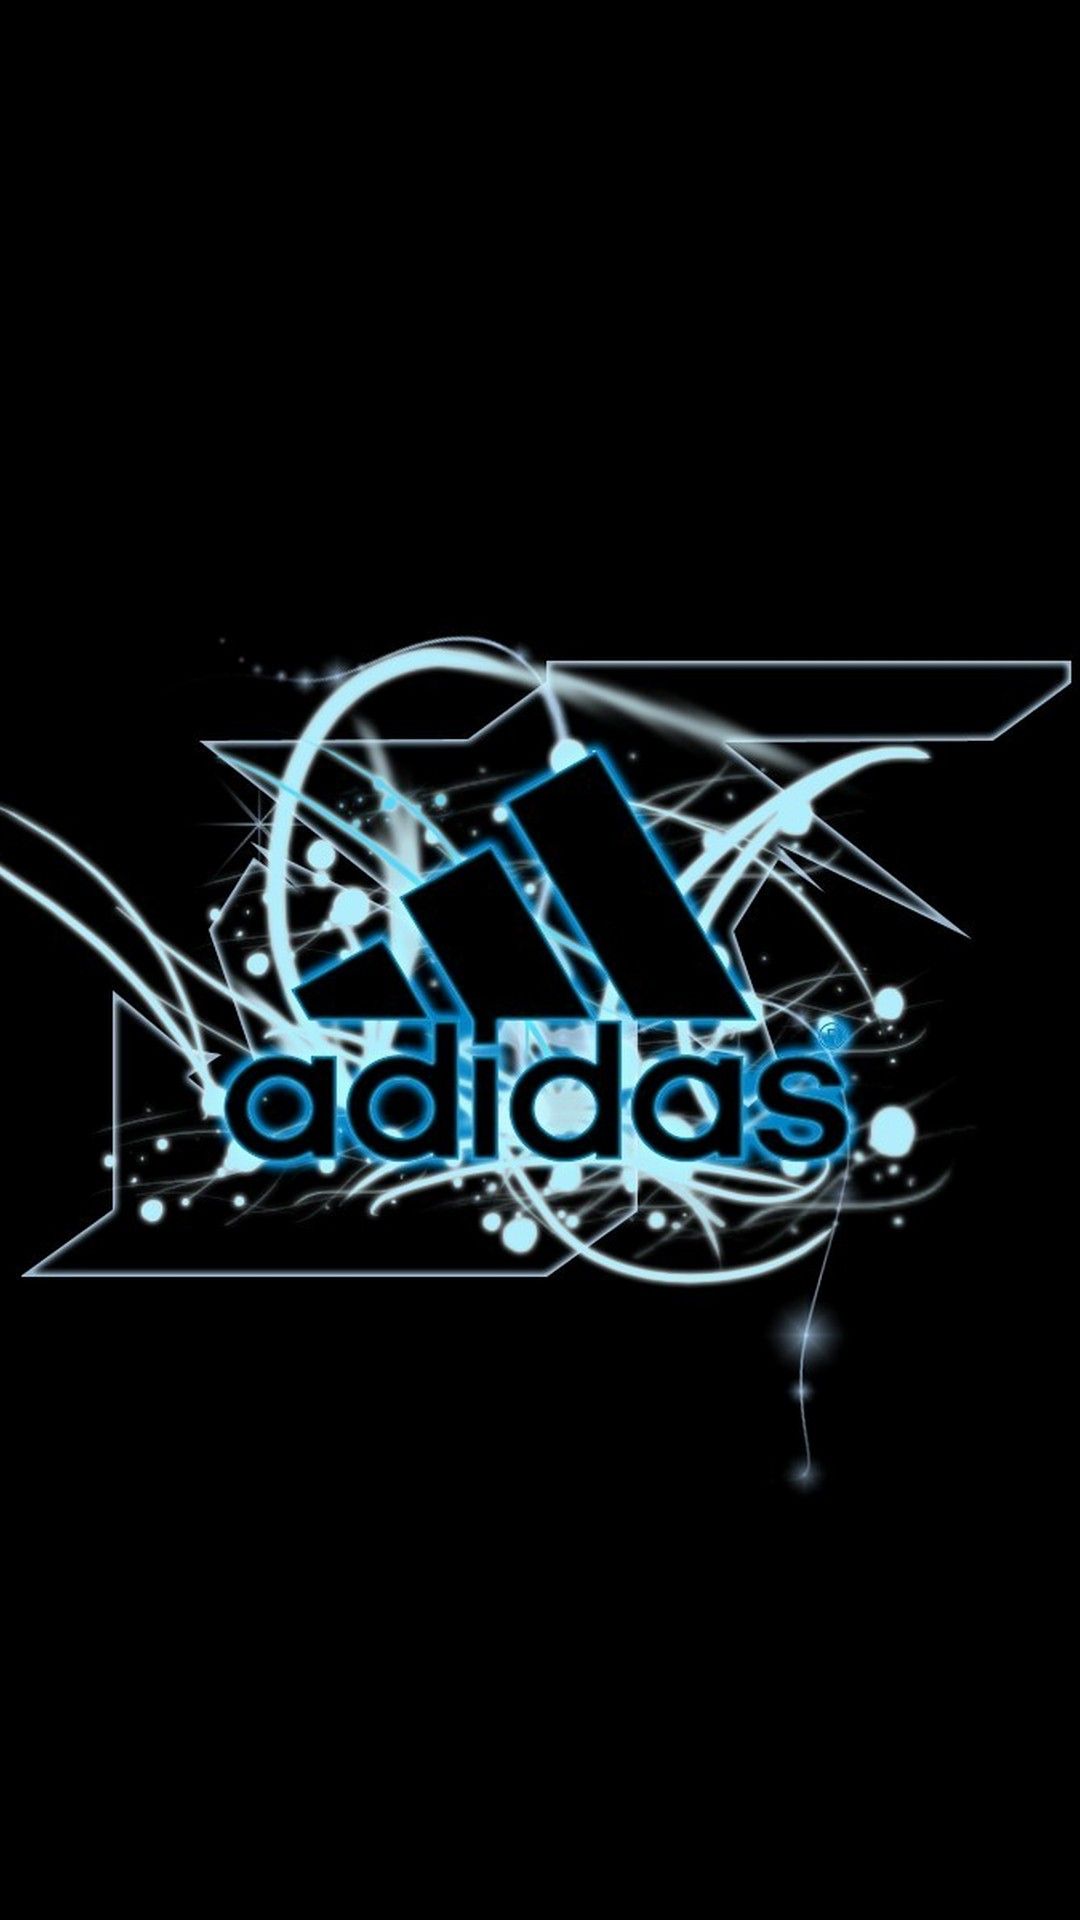 Cool 3D AdidasWallpapers